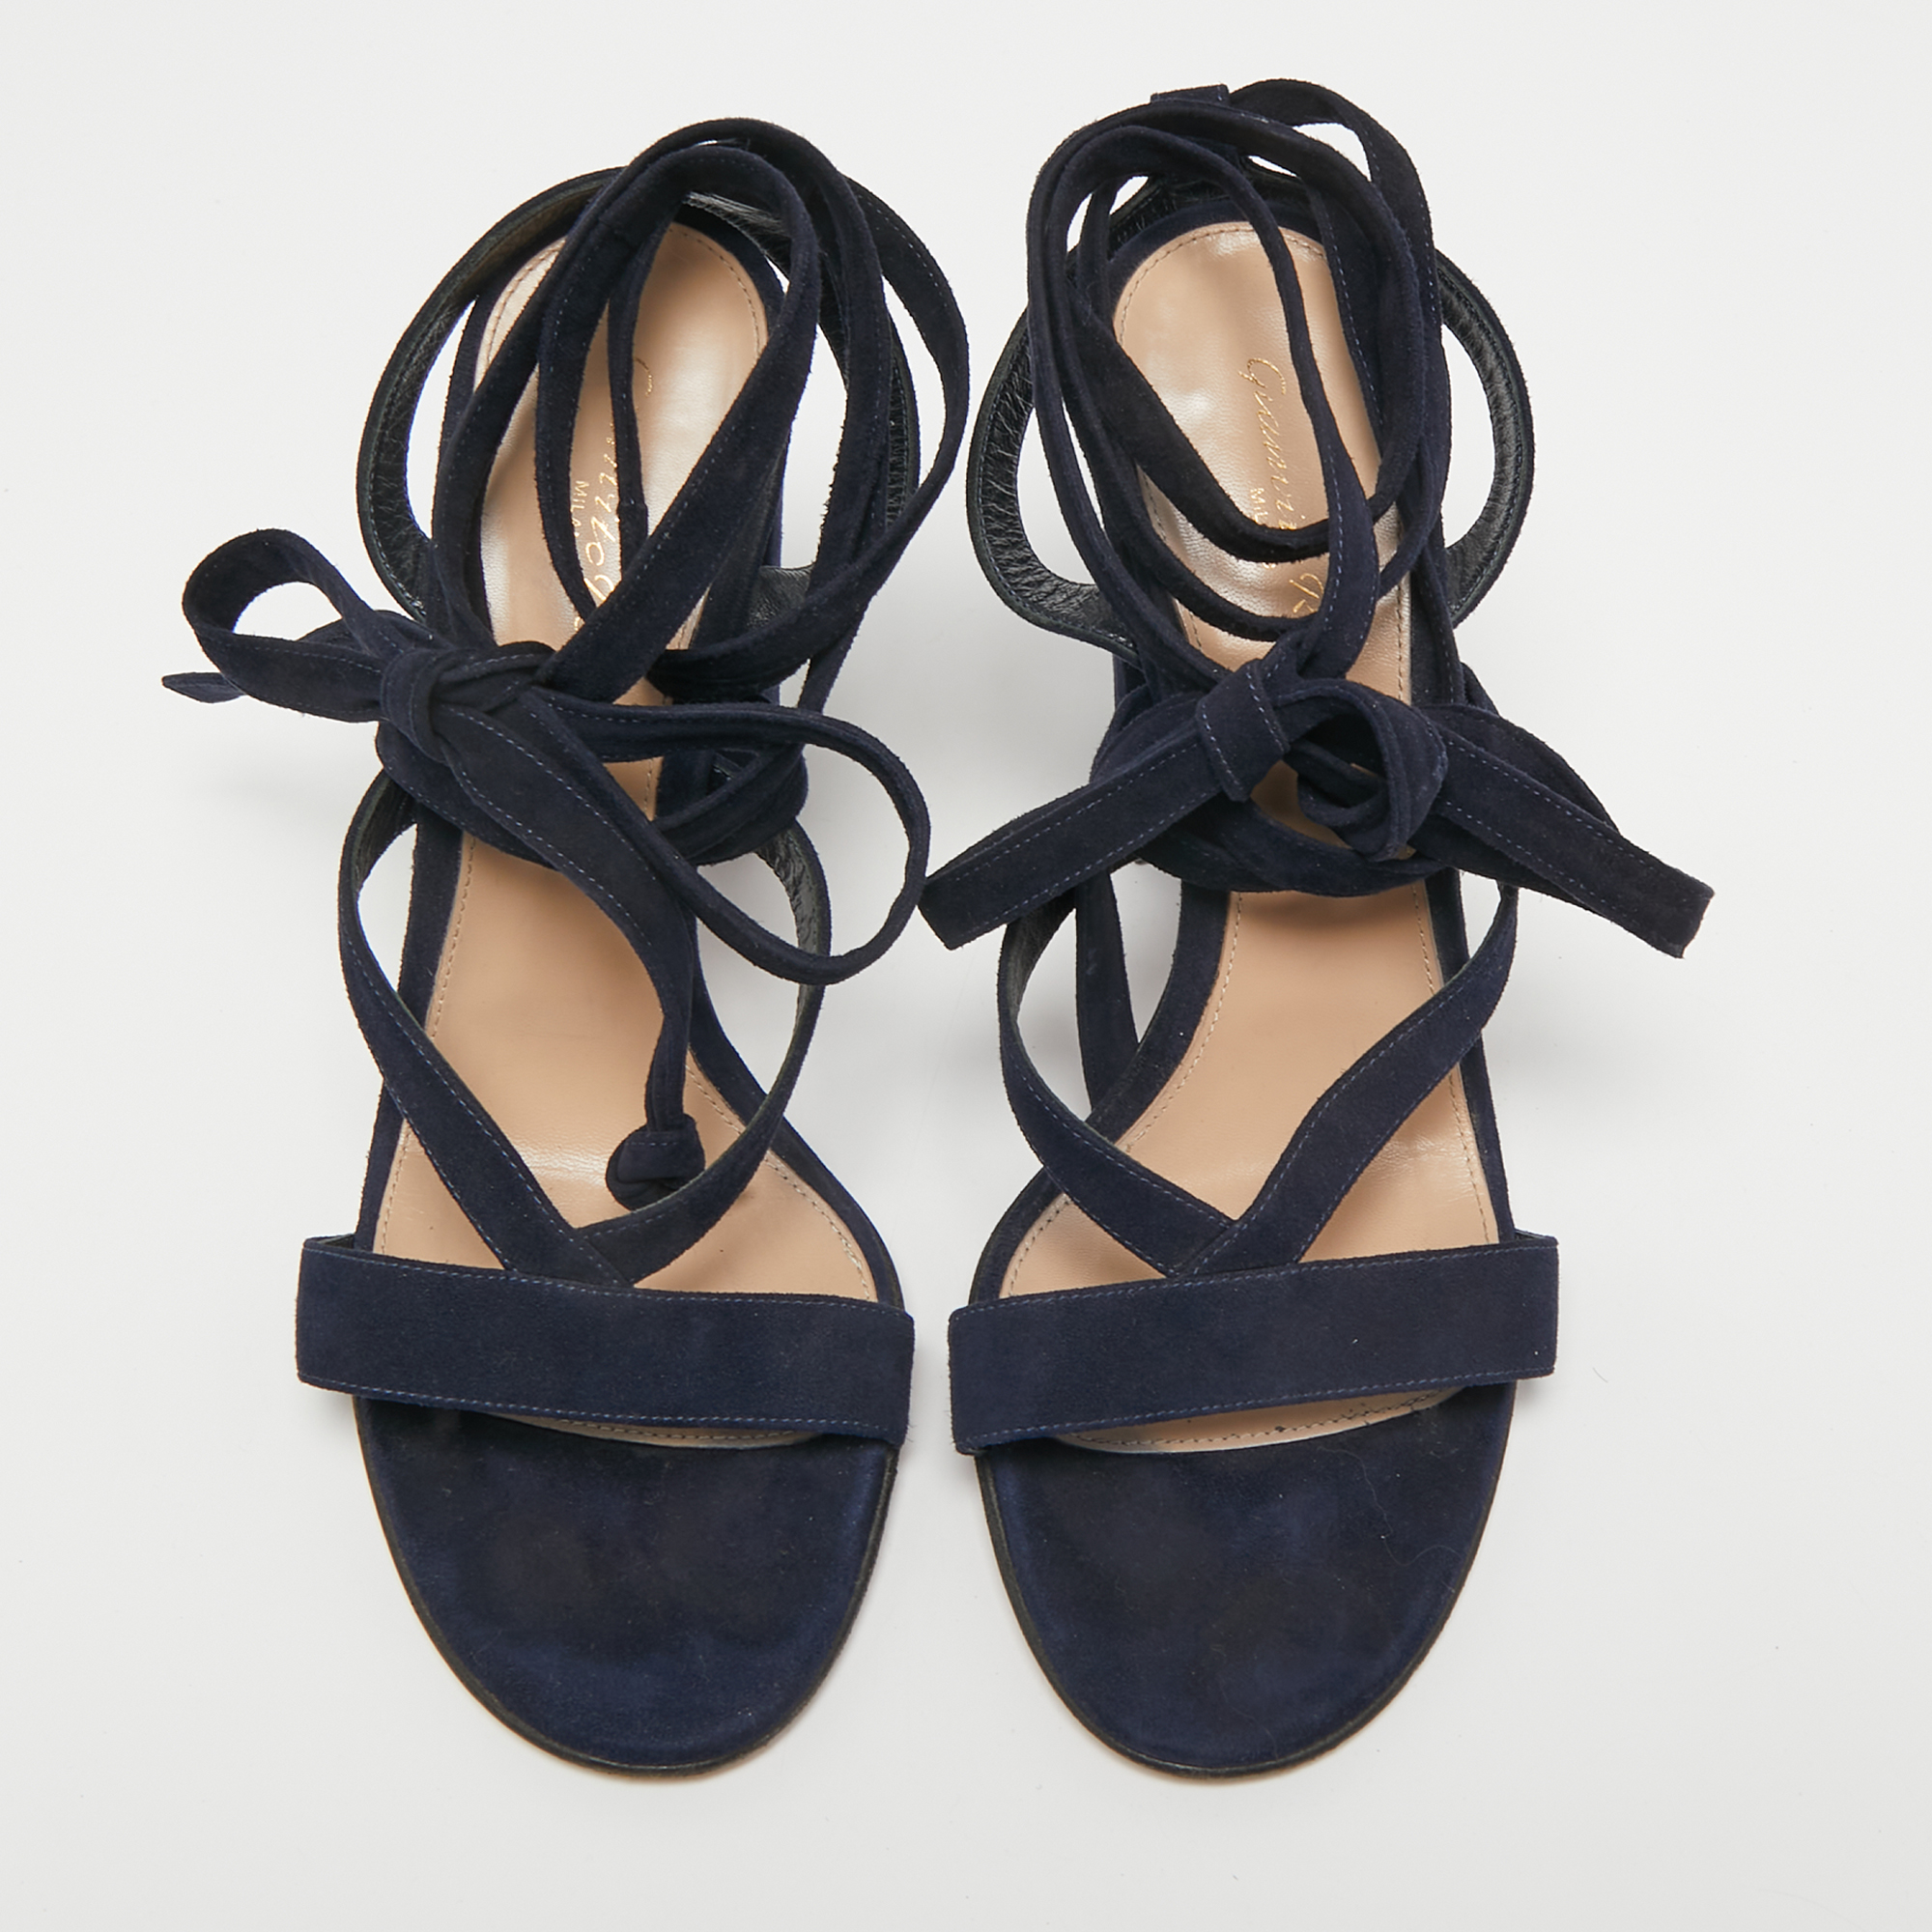 Gianvito Rossi Navy Blue Suede Ankle Wrap Sandals Size 40